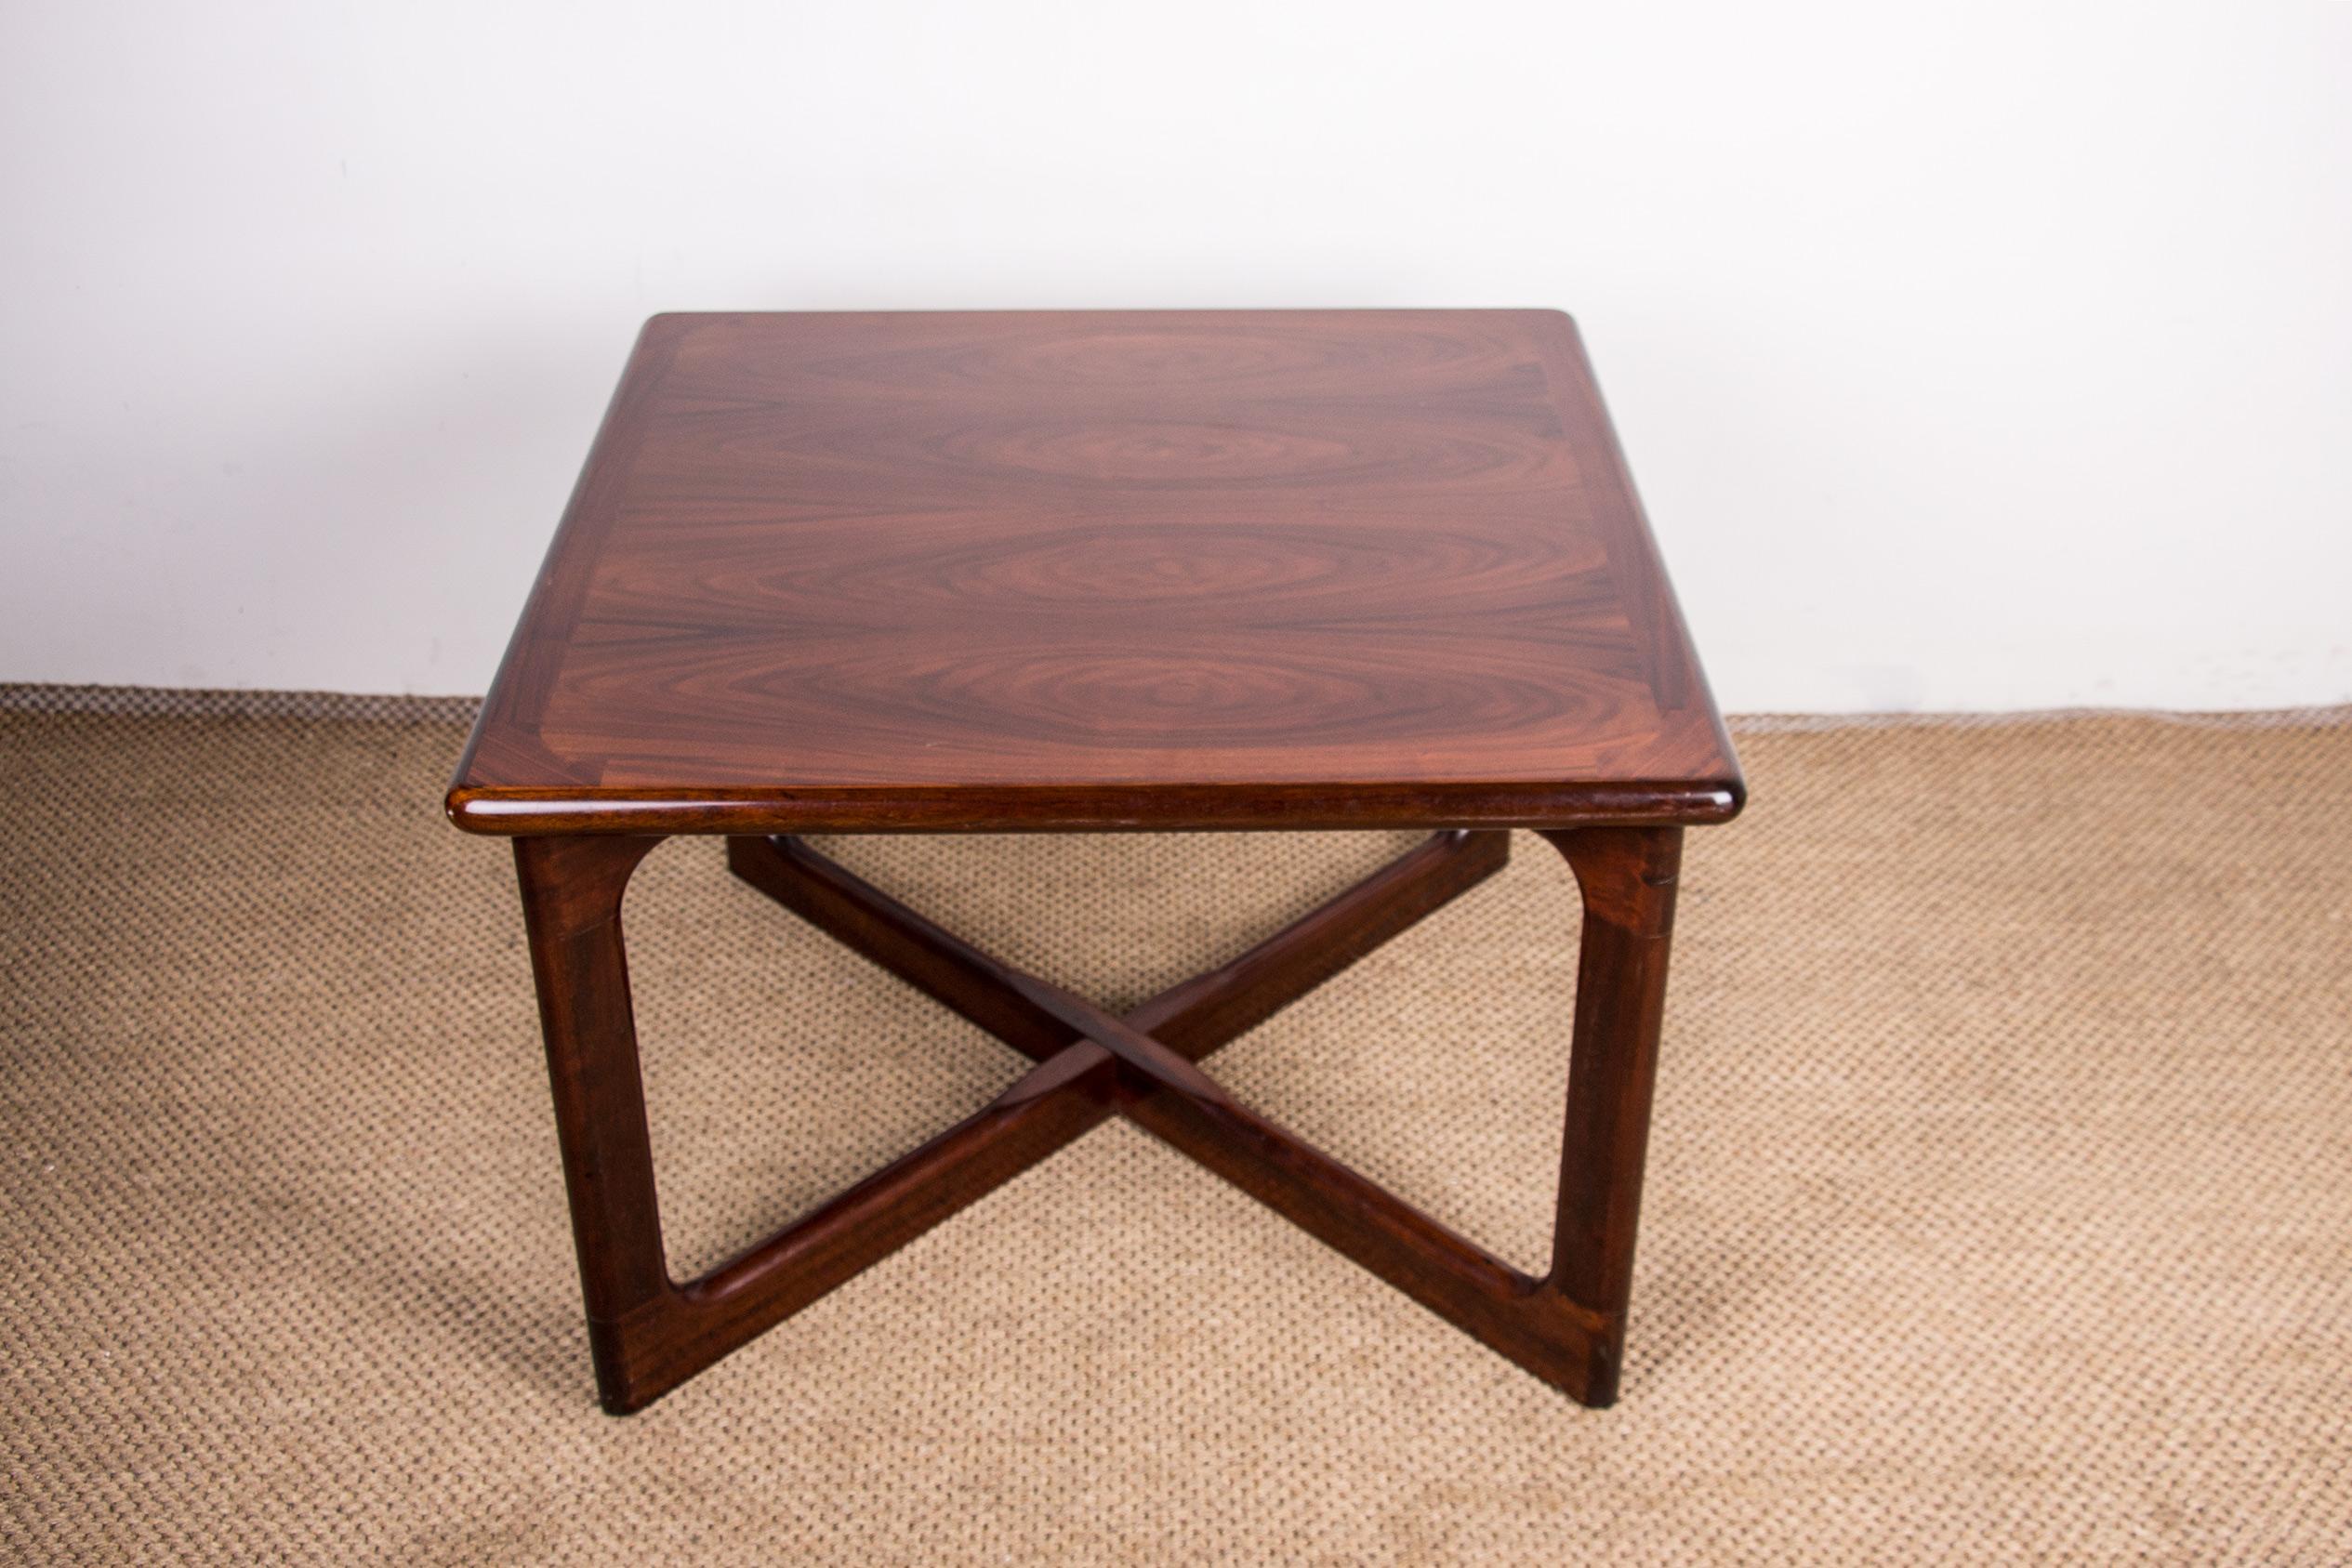 Elegant square-shaped Scandinavian coffee table with clean lines and crossed legs. Manufacture of very good quality.